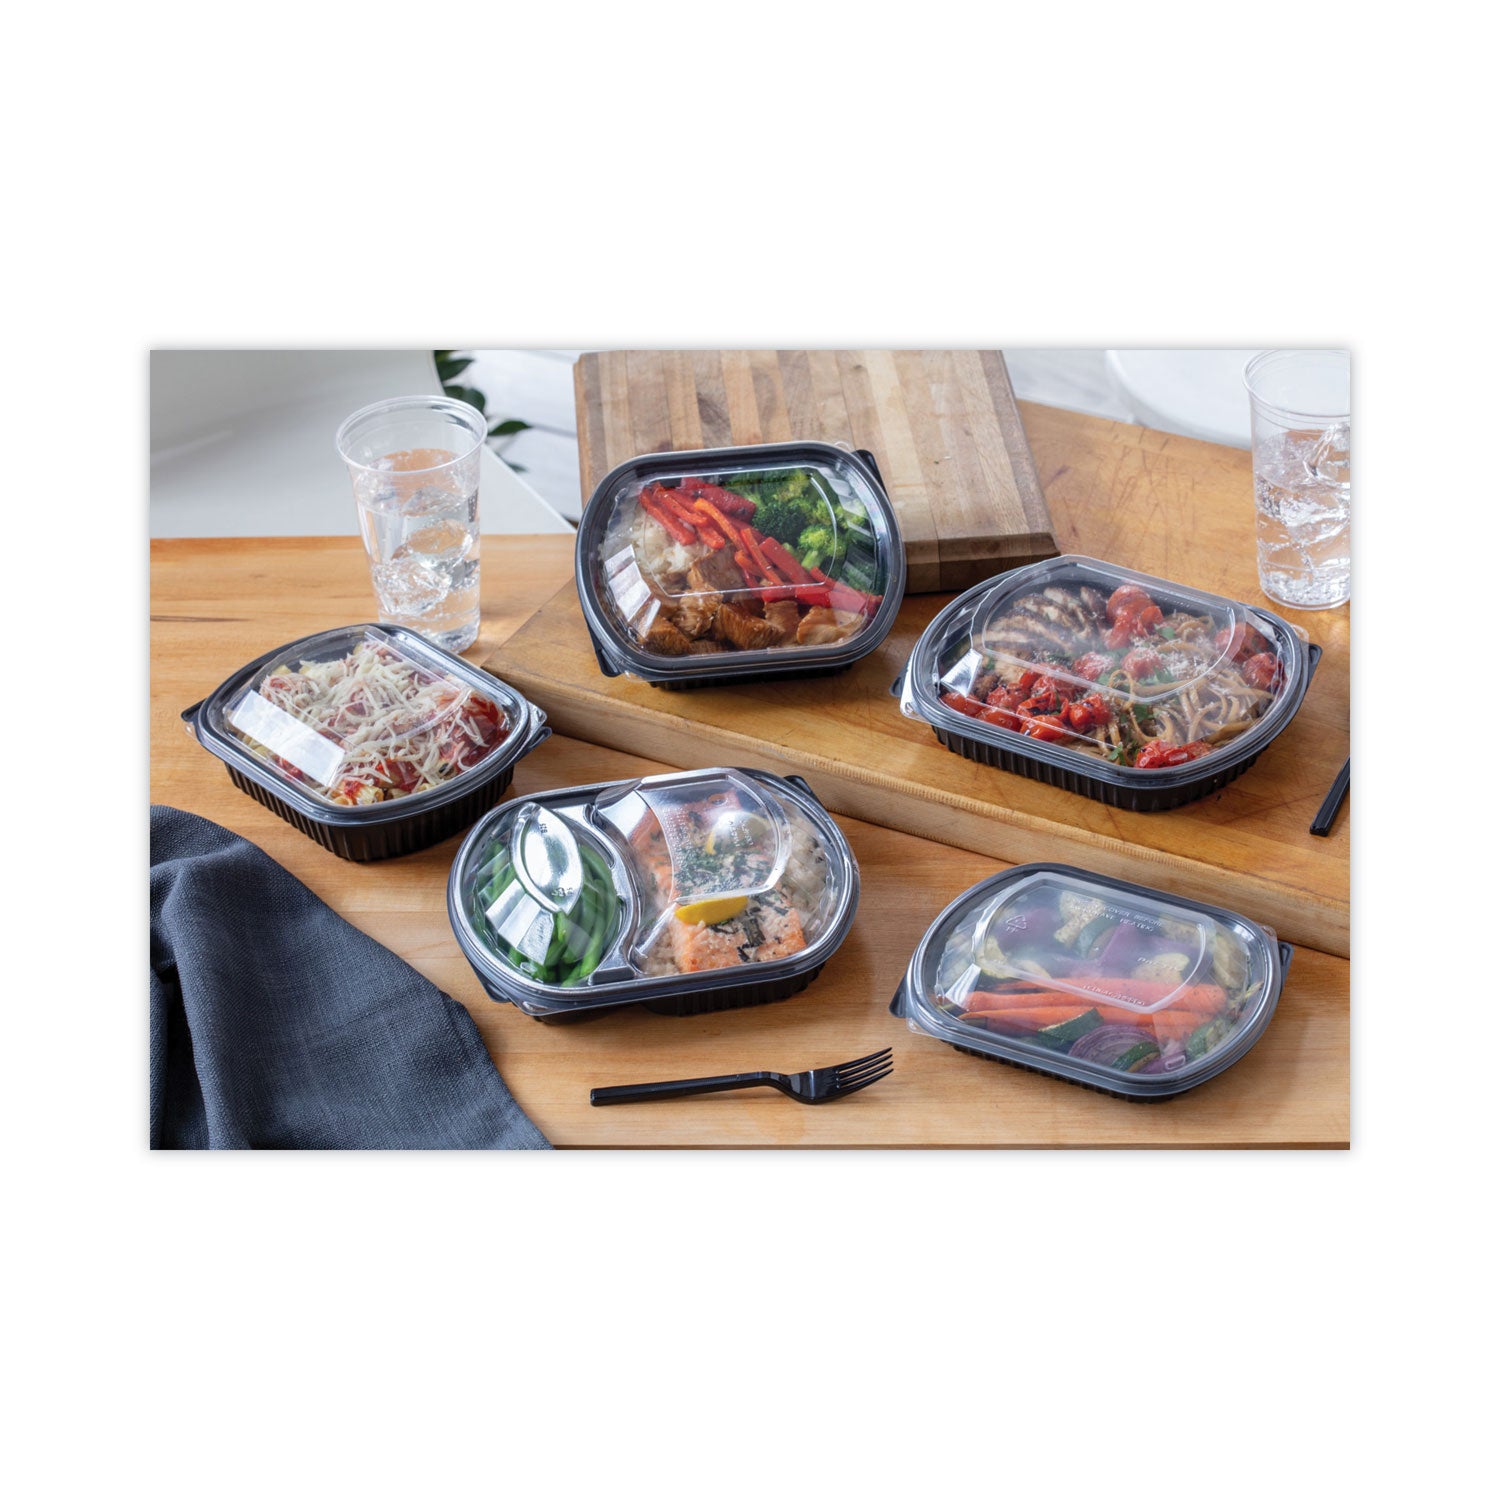 clearview-mealmaster-lid-with-fog-gard-coating-large-2-compartment-dome-lid-938-x-8-x-125-clear-plastic-252-carton_pctycn8467h00d0 - 7